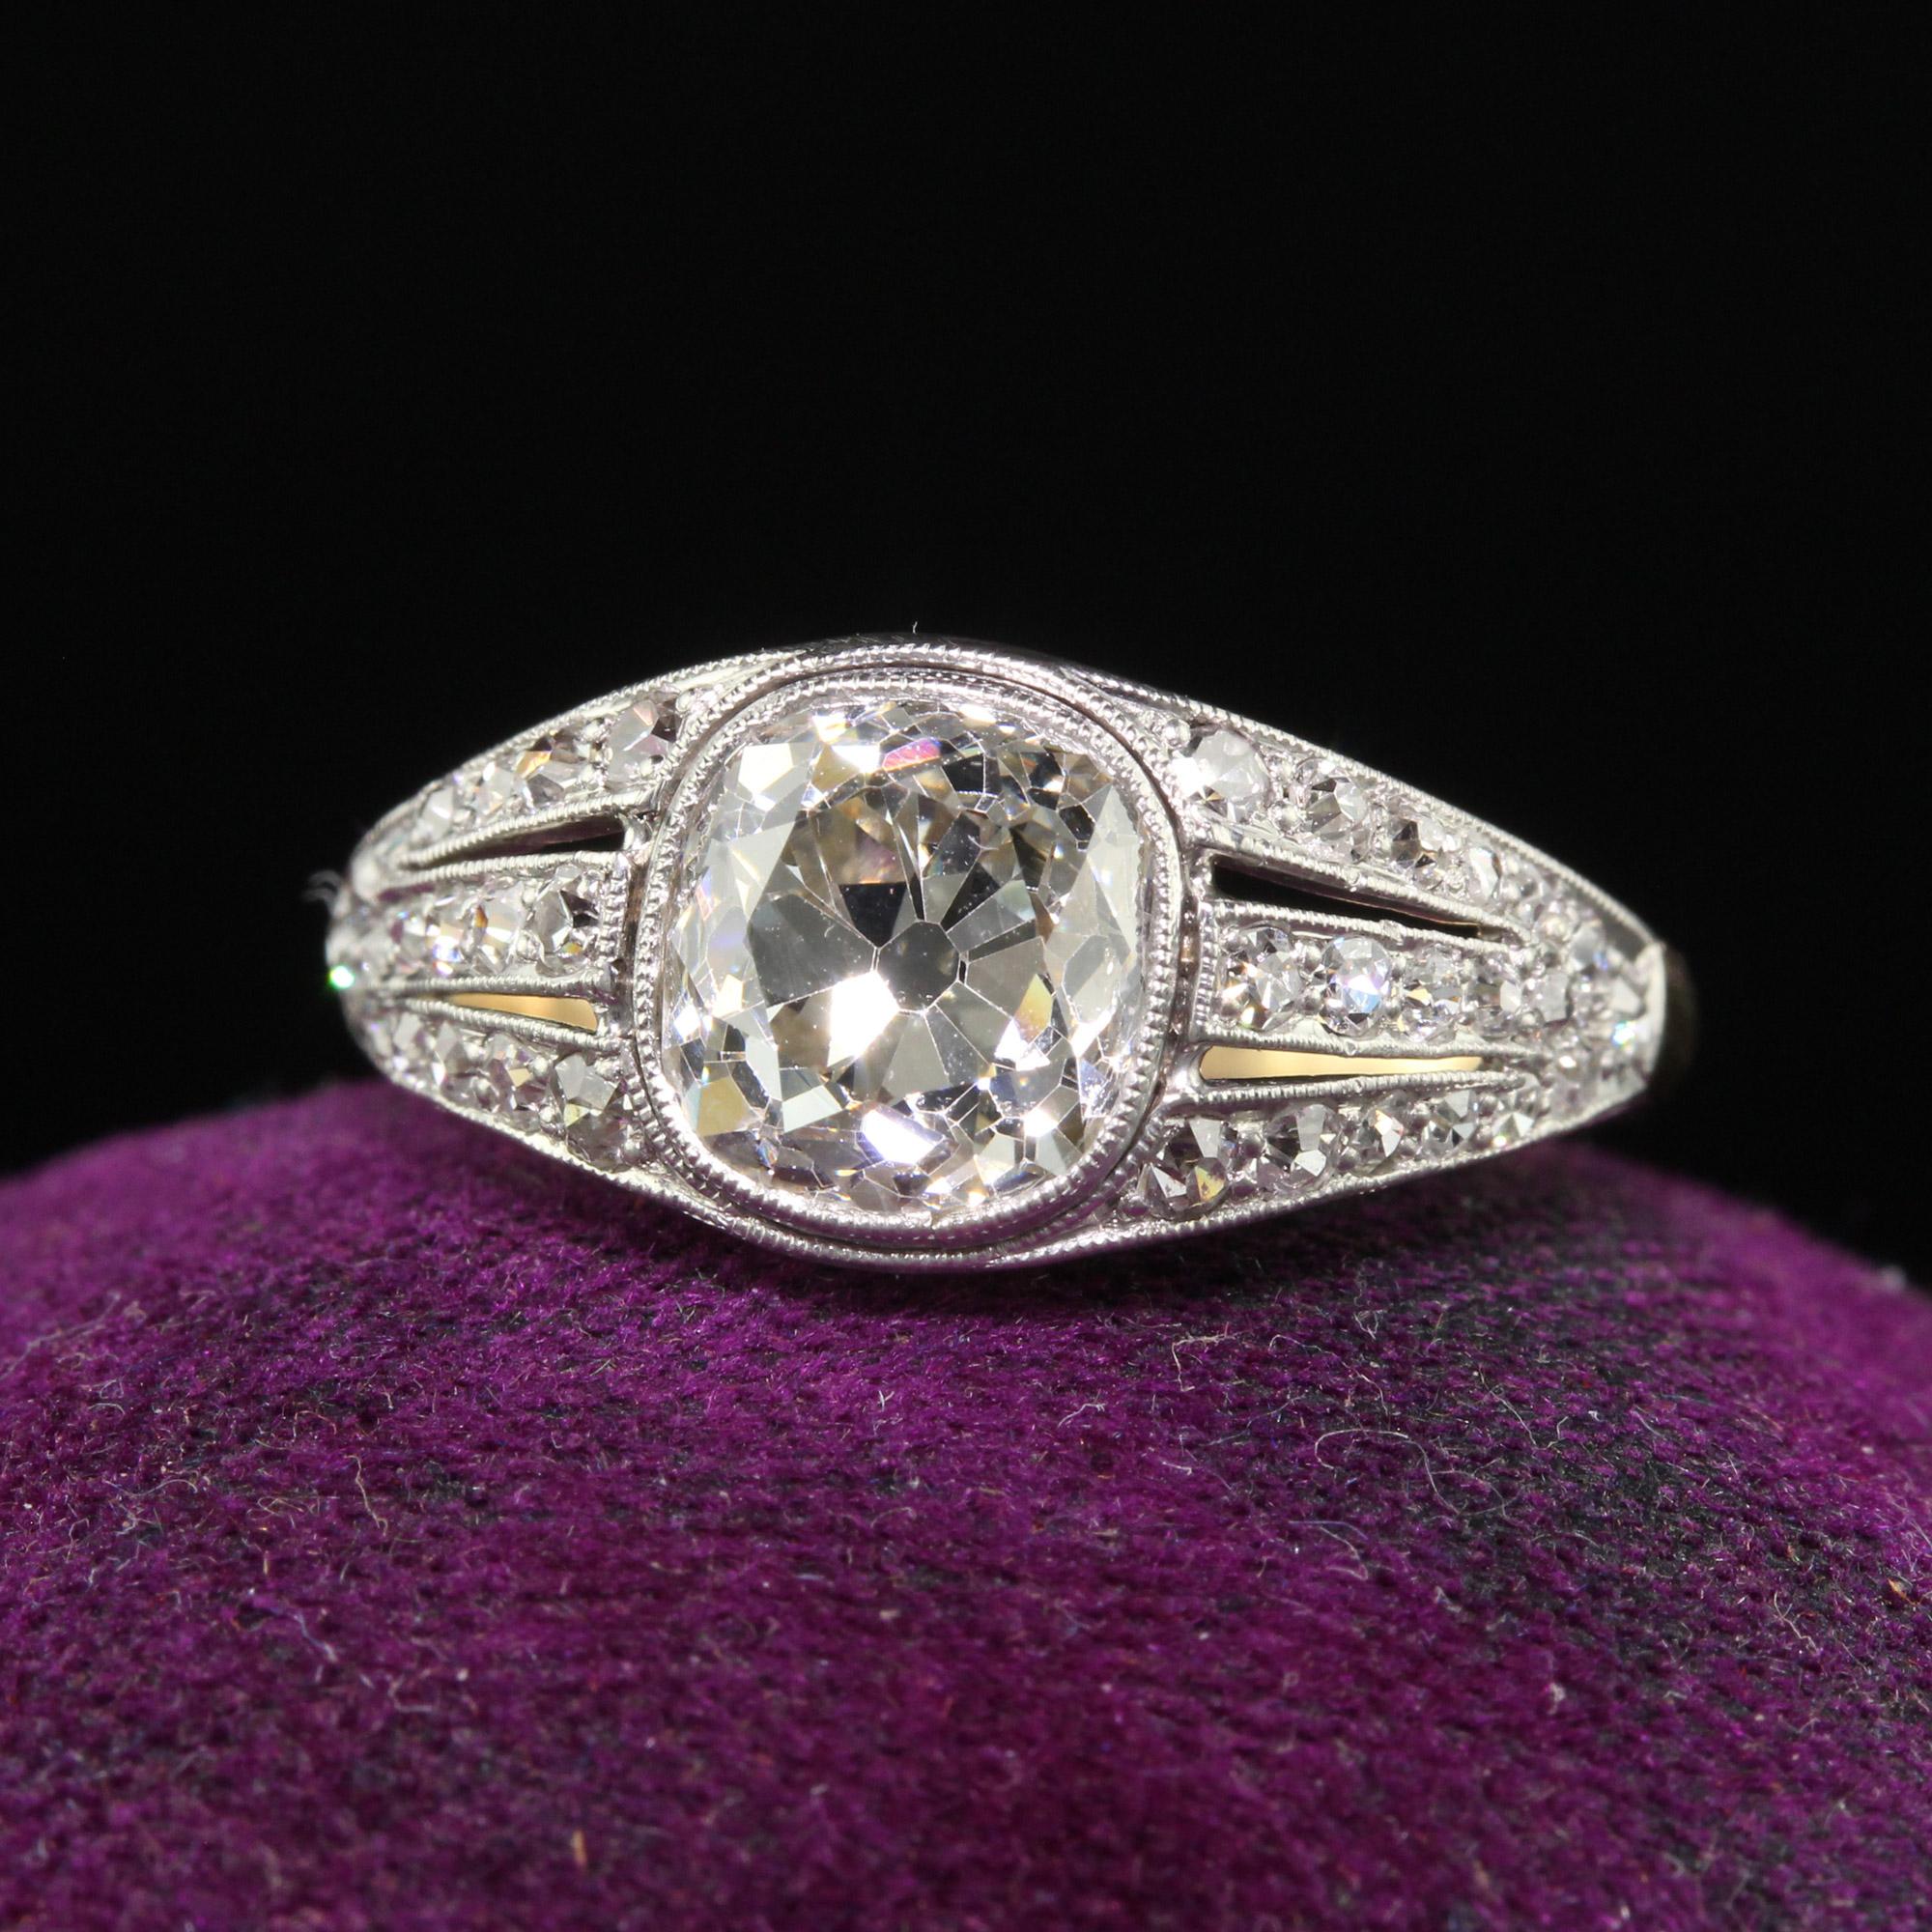 Beautiful Antique Edwardian 18K Gold Platinum Old Mine Diamond Engagement Ring - GIA. This incredible engagement ring is crafted in 18k yellow gold and platinum. The center holds a gorgeous old mine cut diamond that has a GIA report. The side